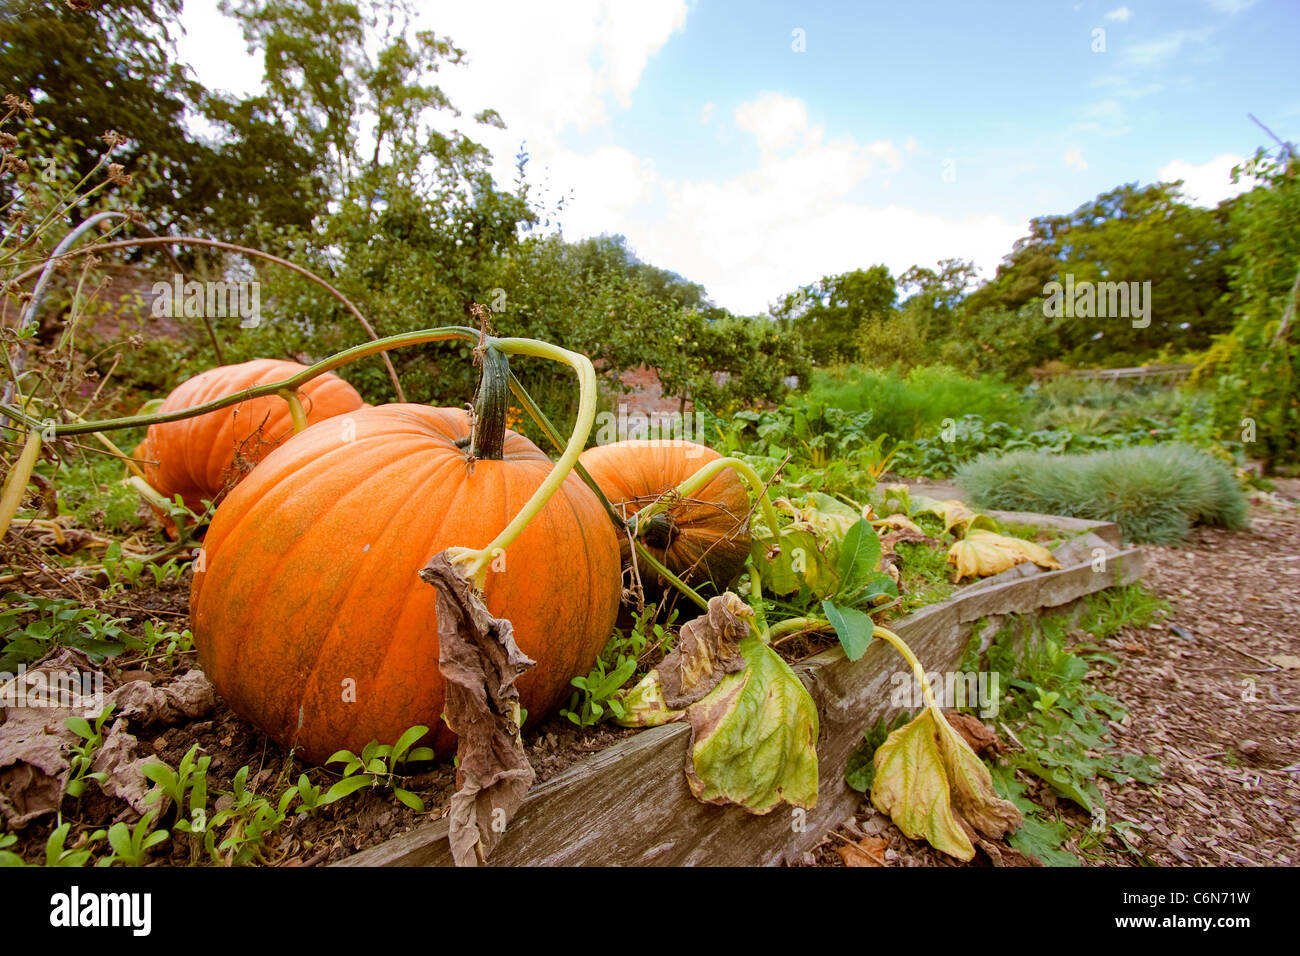 pumpkin in a vegetable patch in summer uk Stock Photo